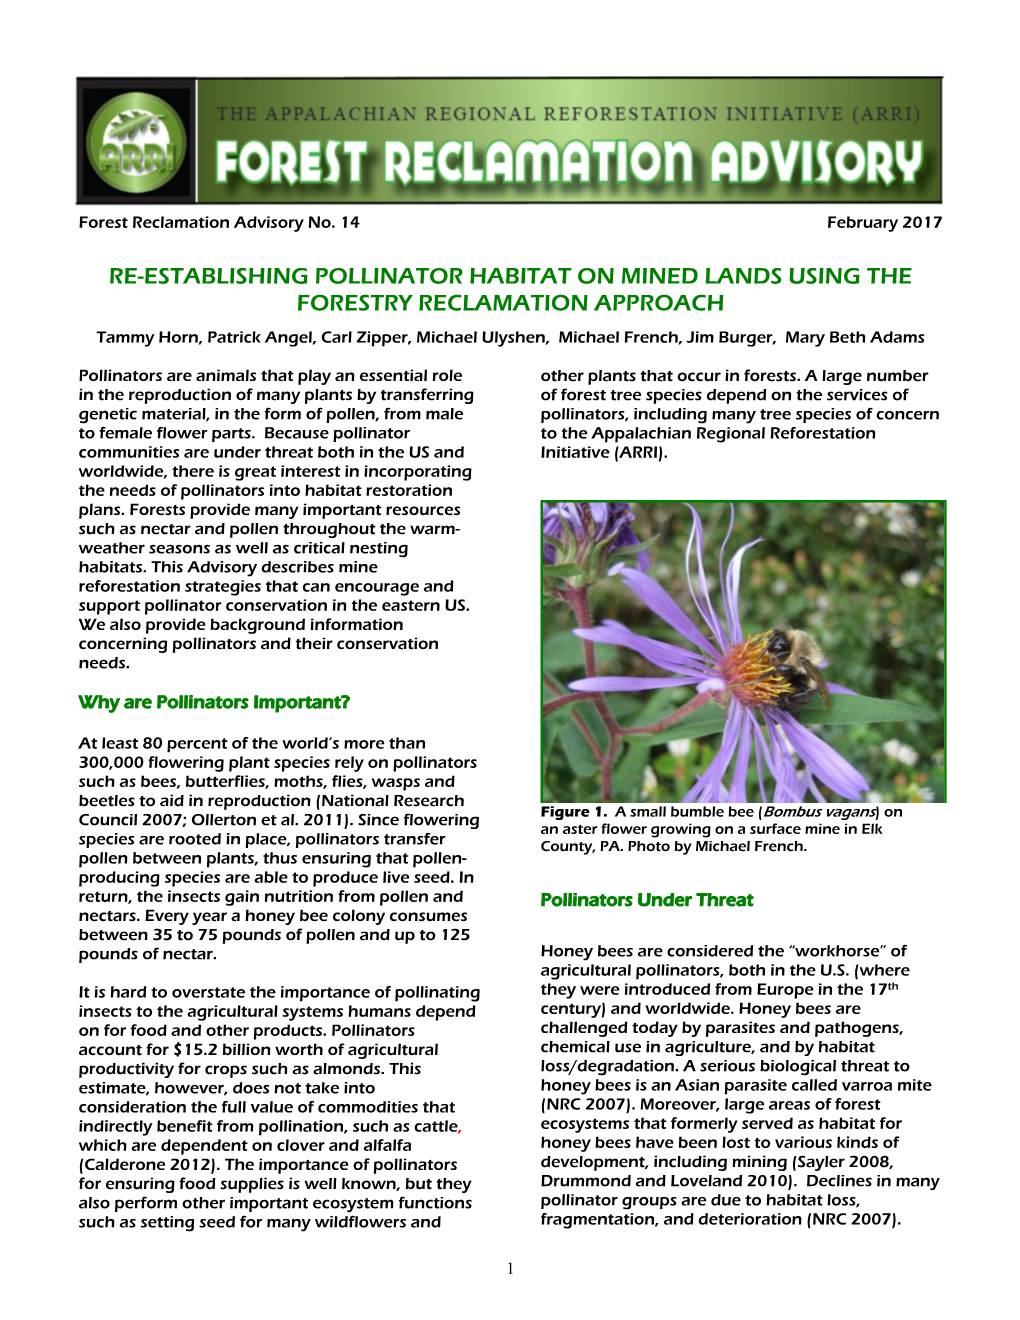 Re-Establishing Pollinator Habitat on Mined Lands Using the Forestry Reclamation Approach